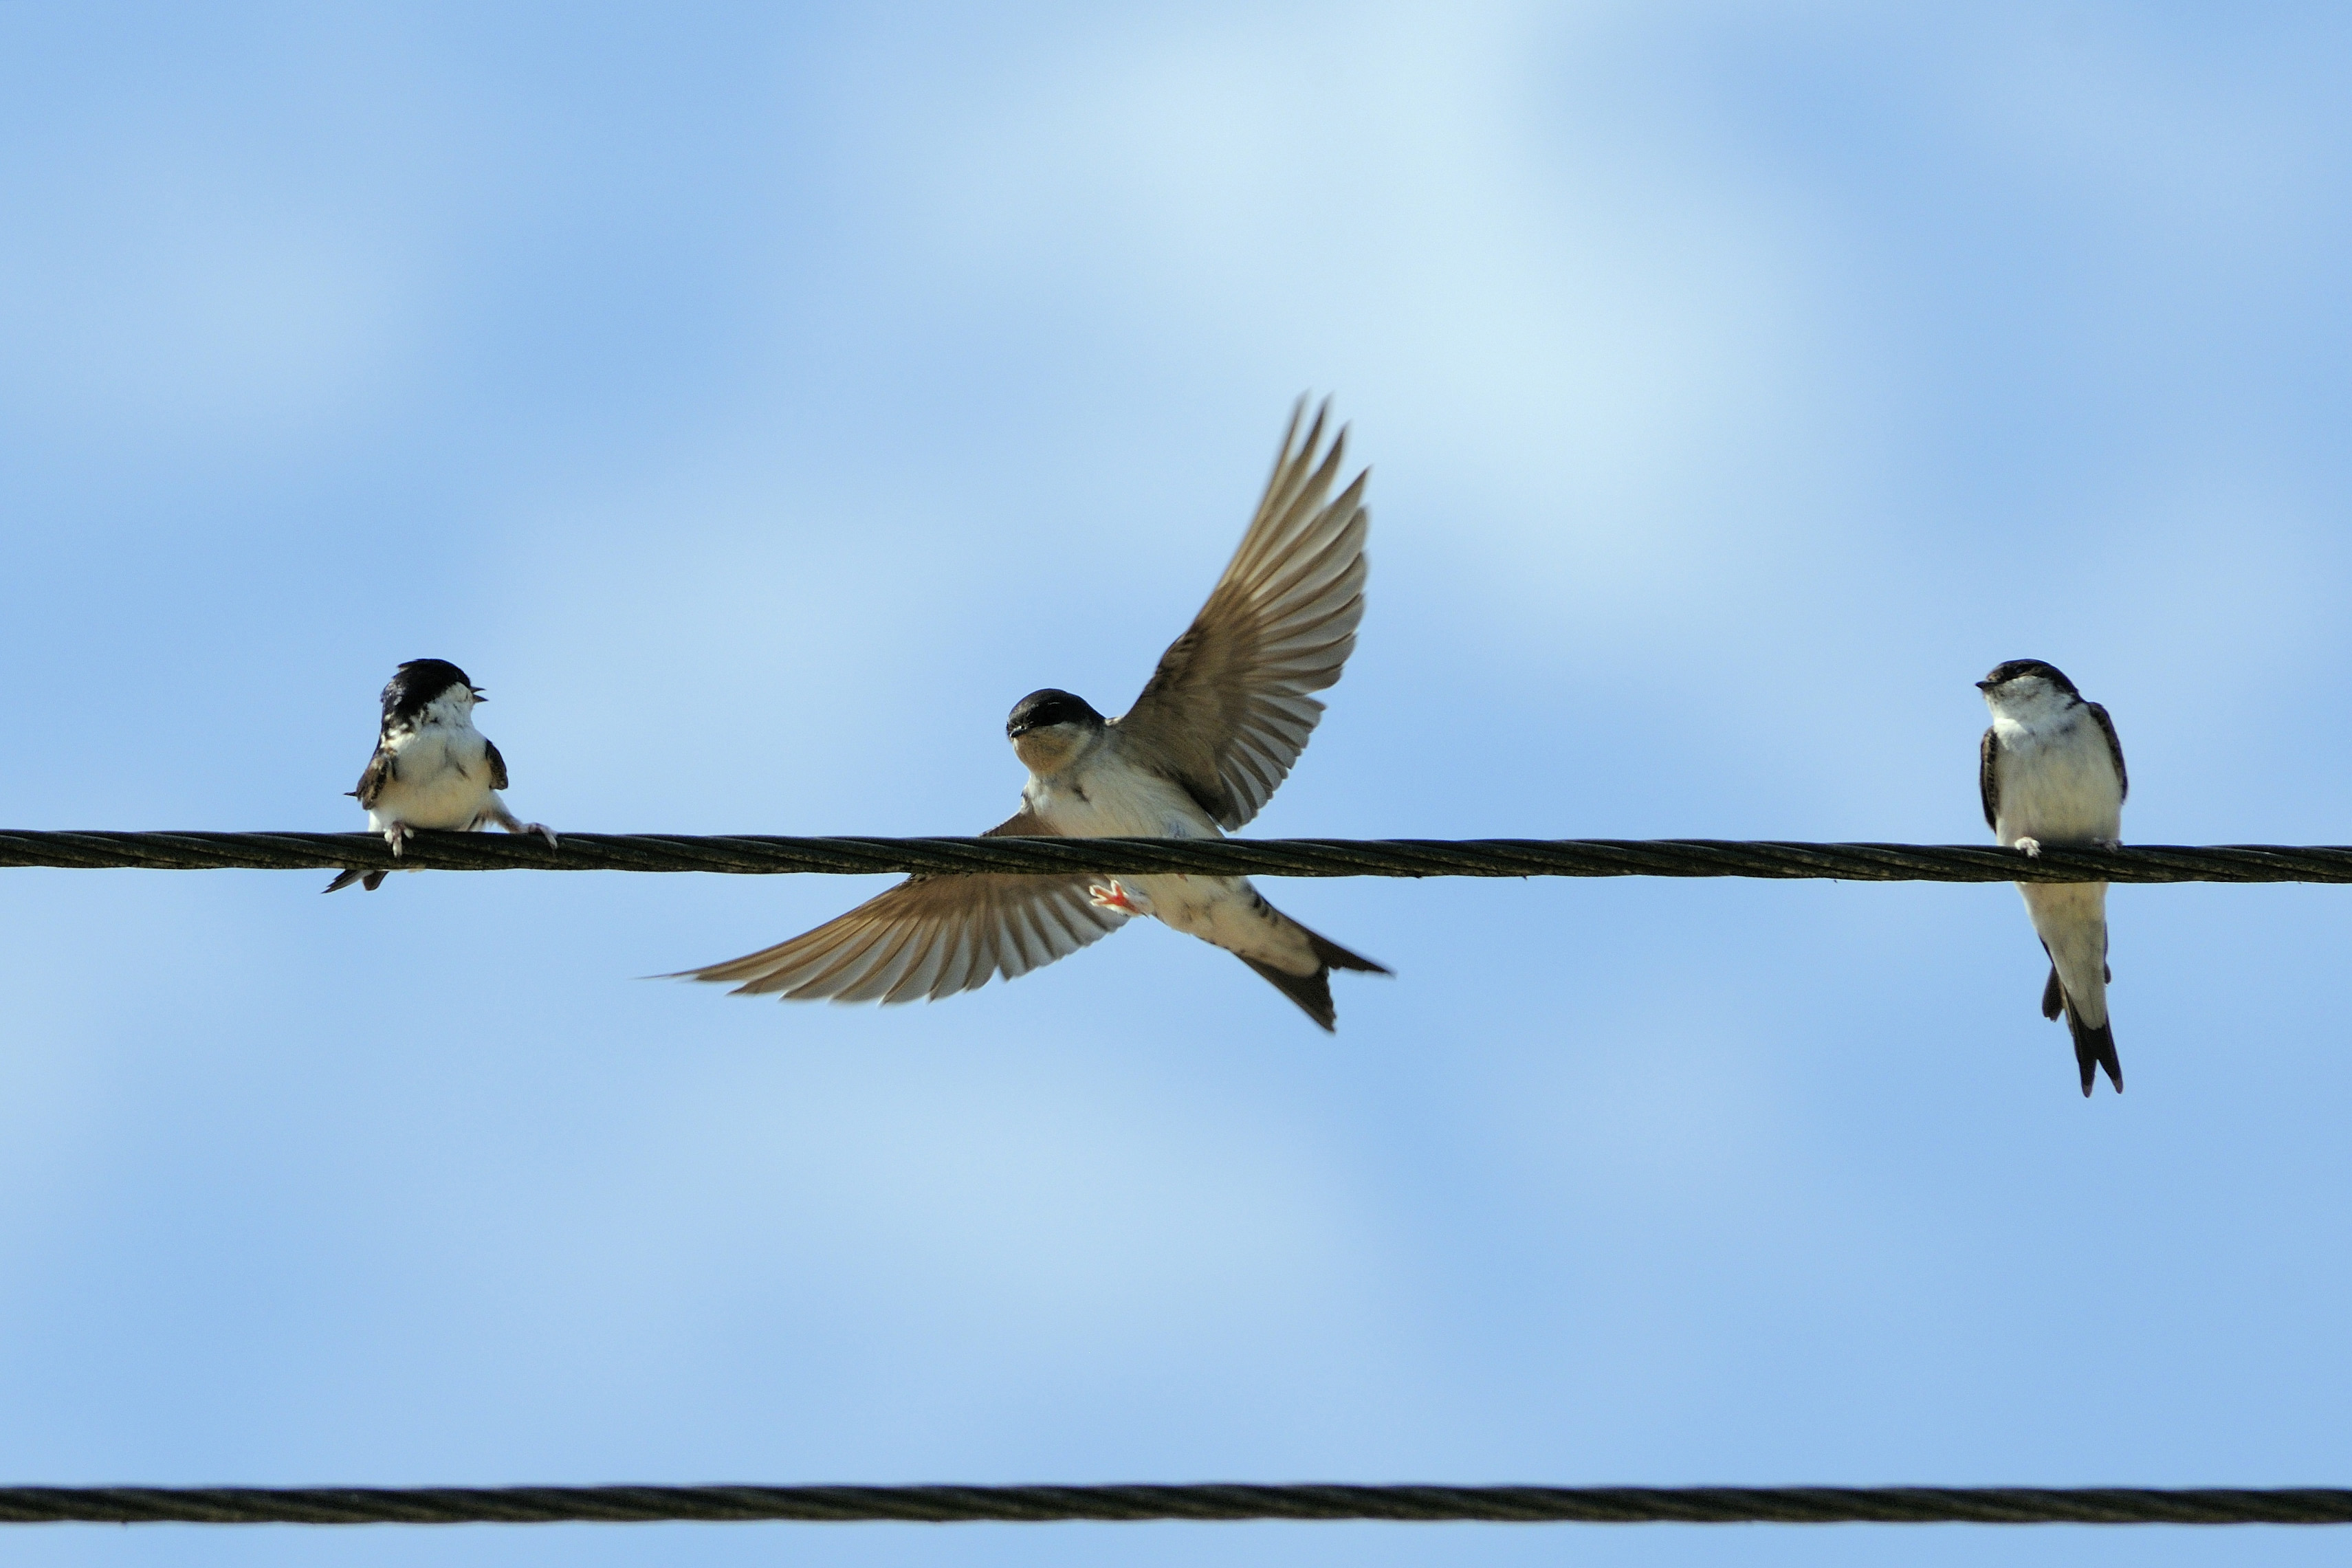 Young house martin about to land between two adults on telephone wire to join gathering in preparation for migration (